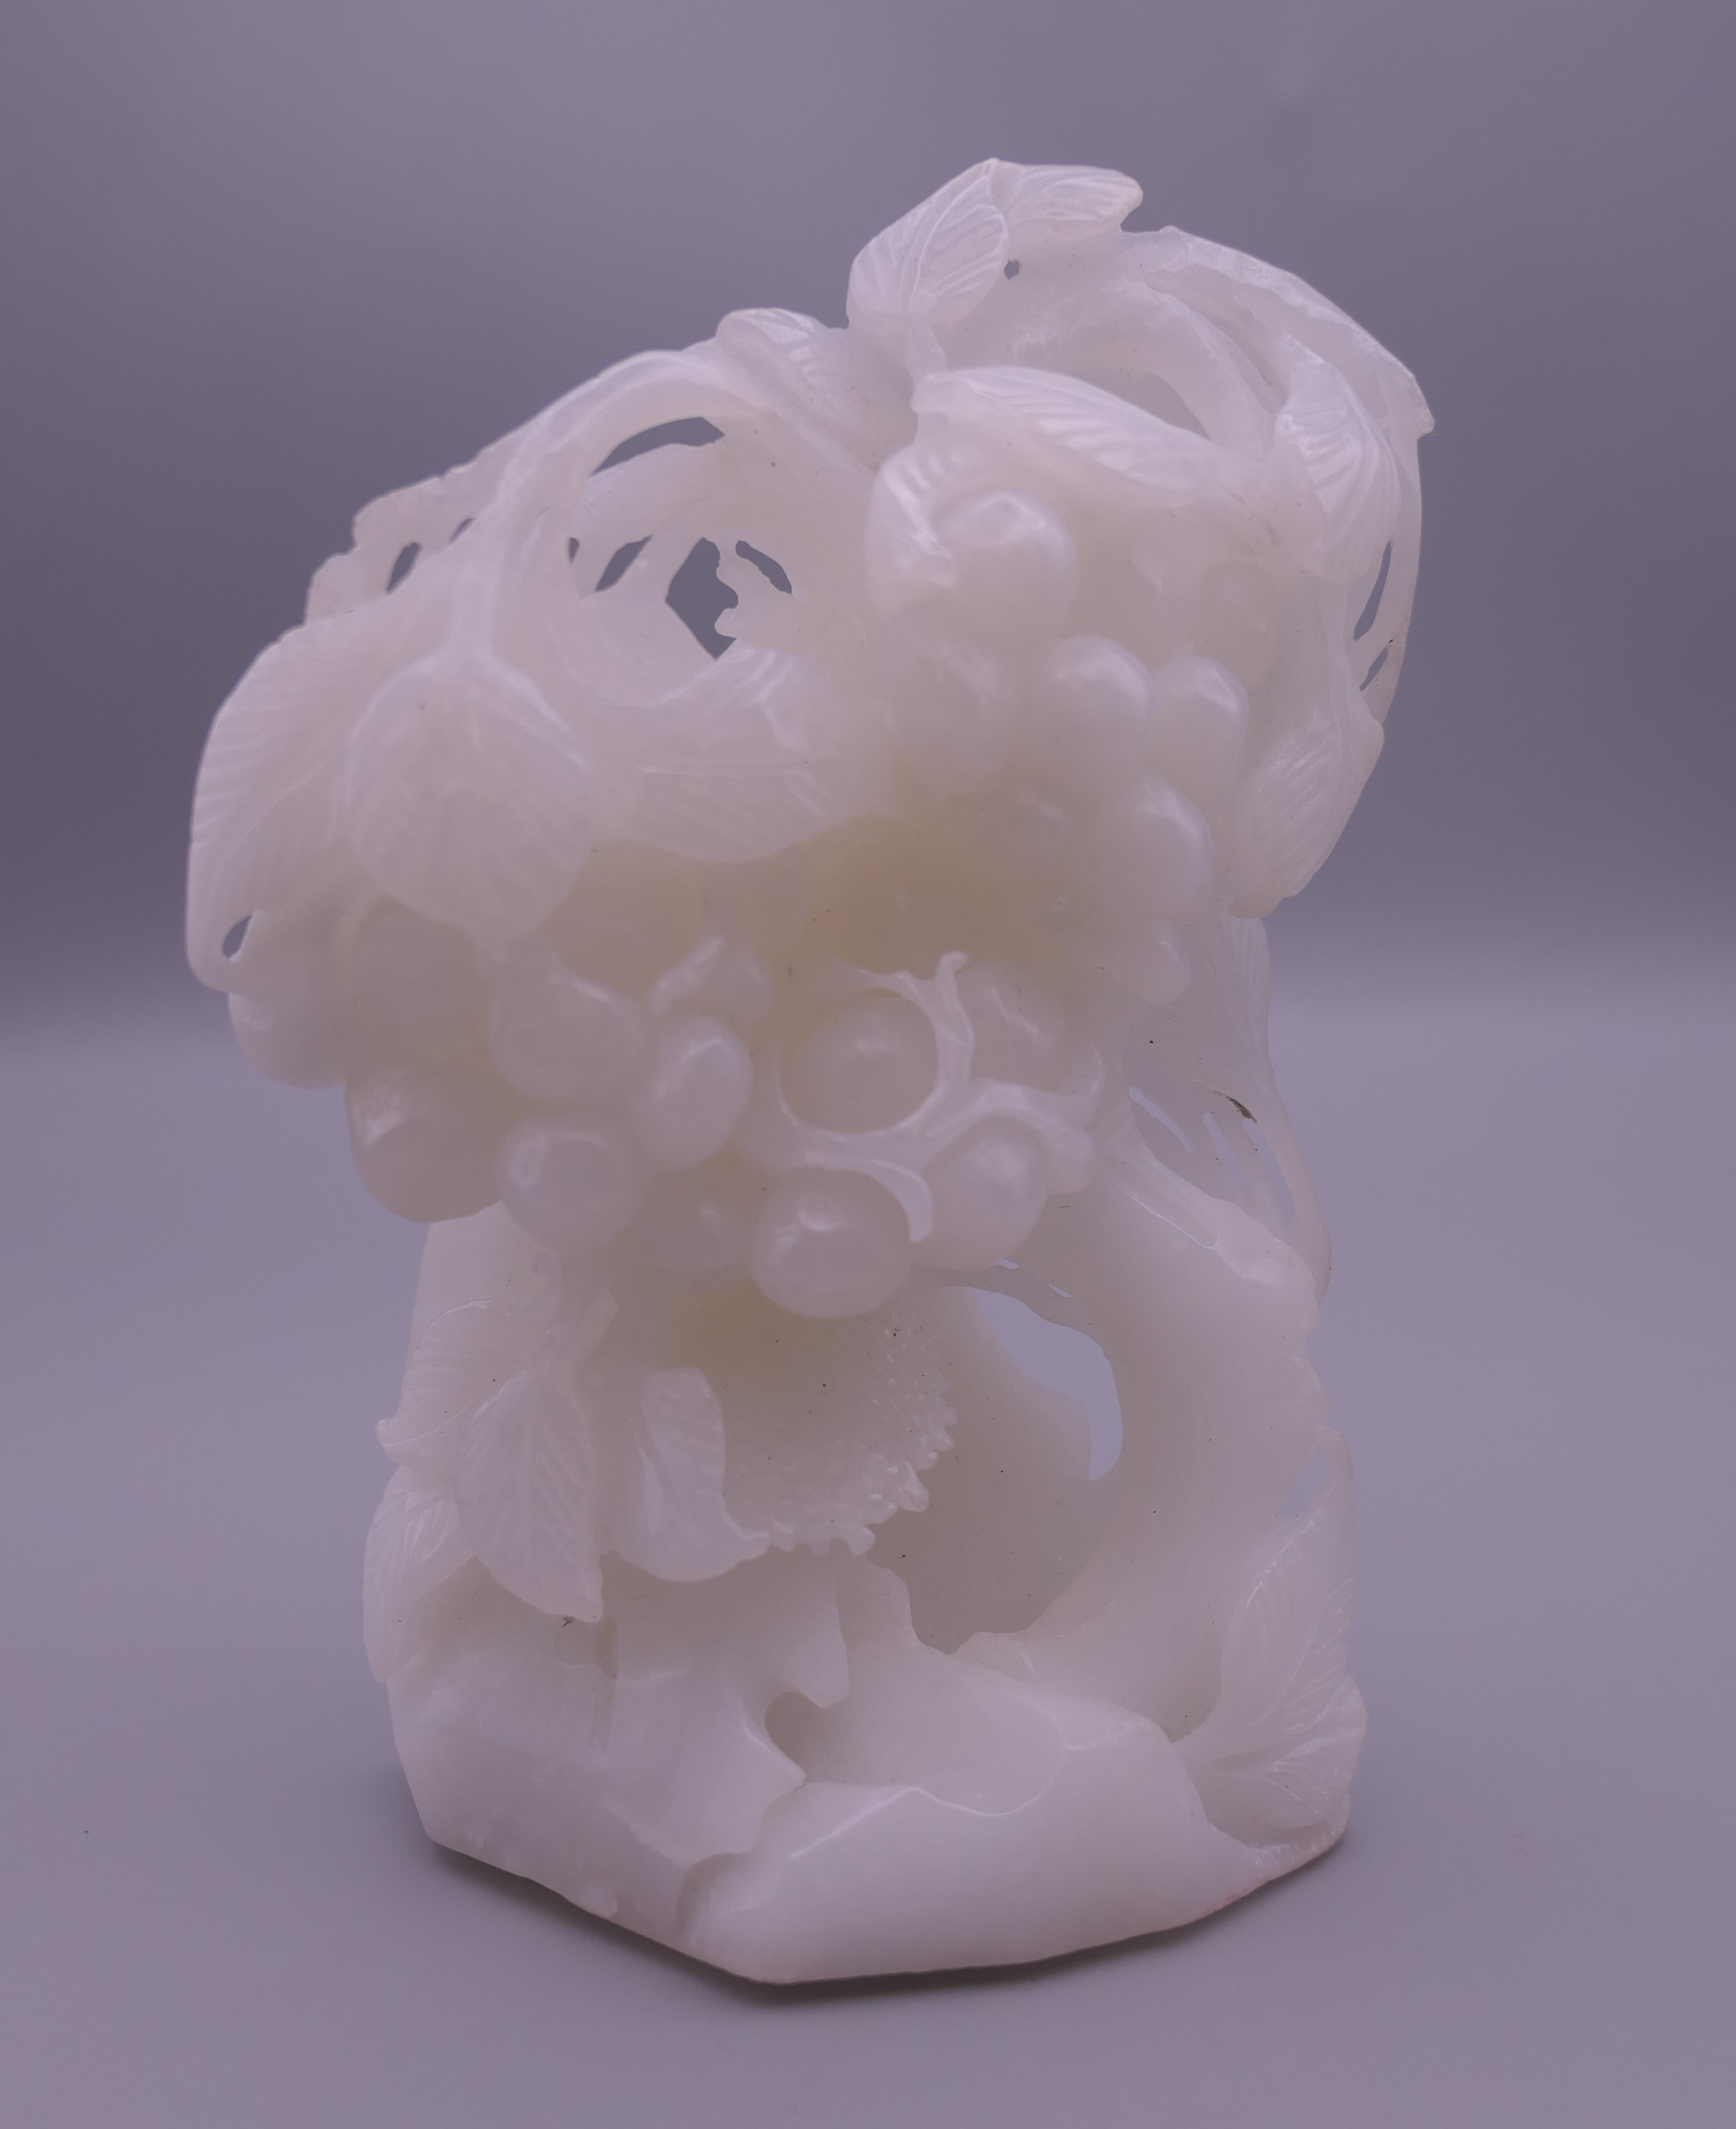 A small white jade carving. 11.5 cm high.